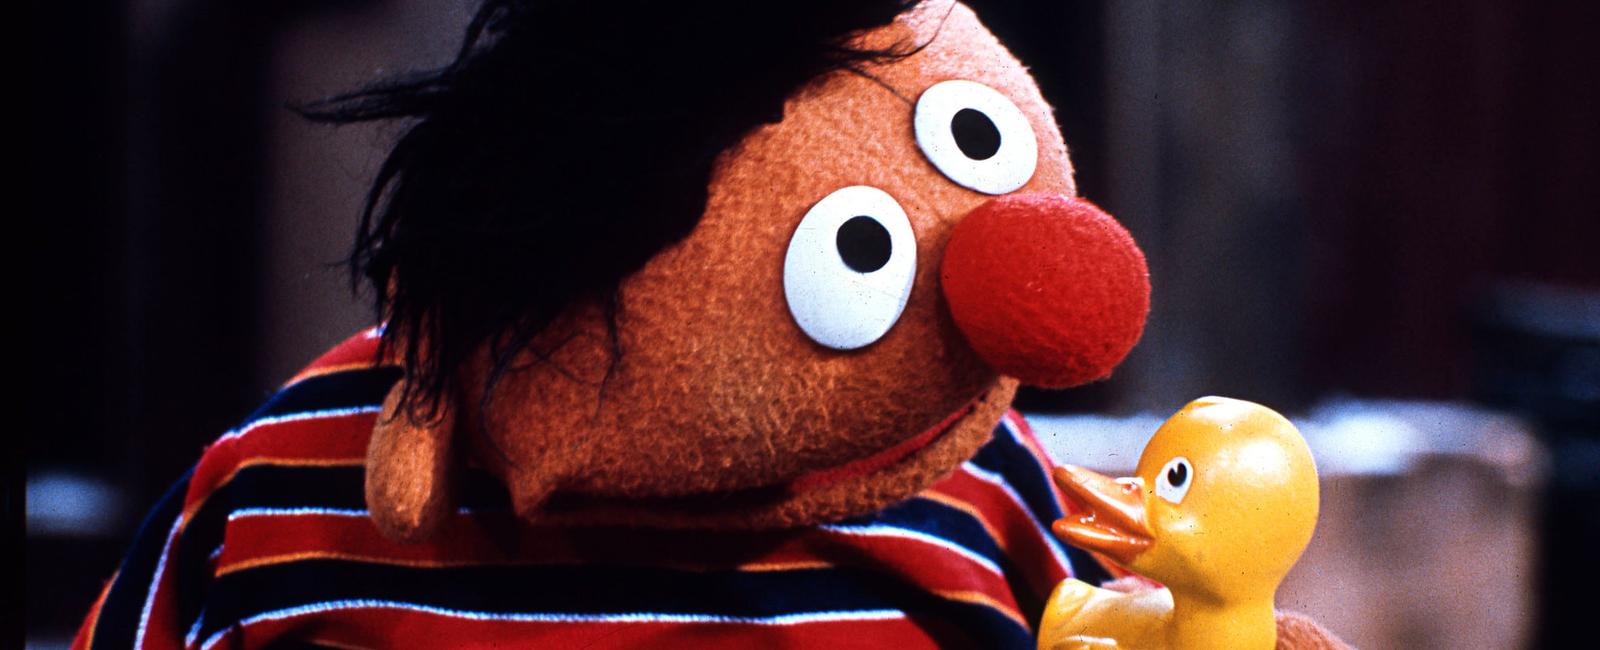 rubber duckie by ernie on sesame street won a grammy nomination in 1970 and reached 16 on the charts